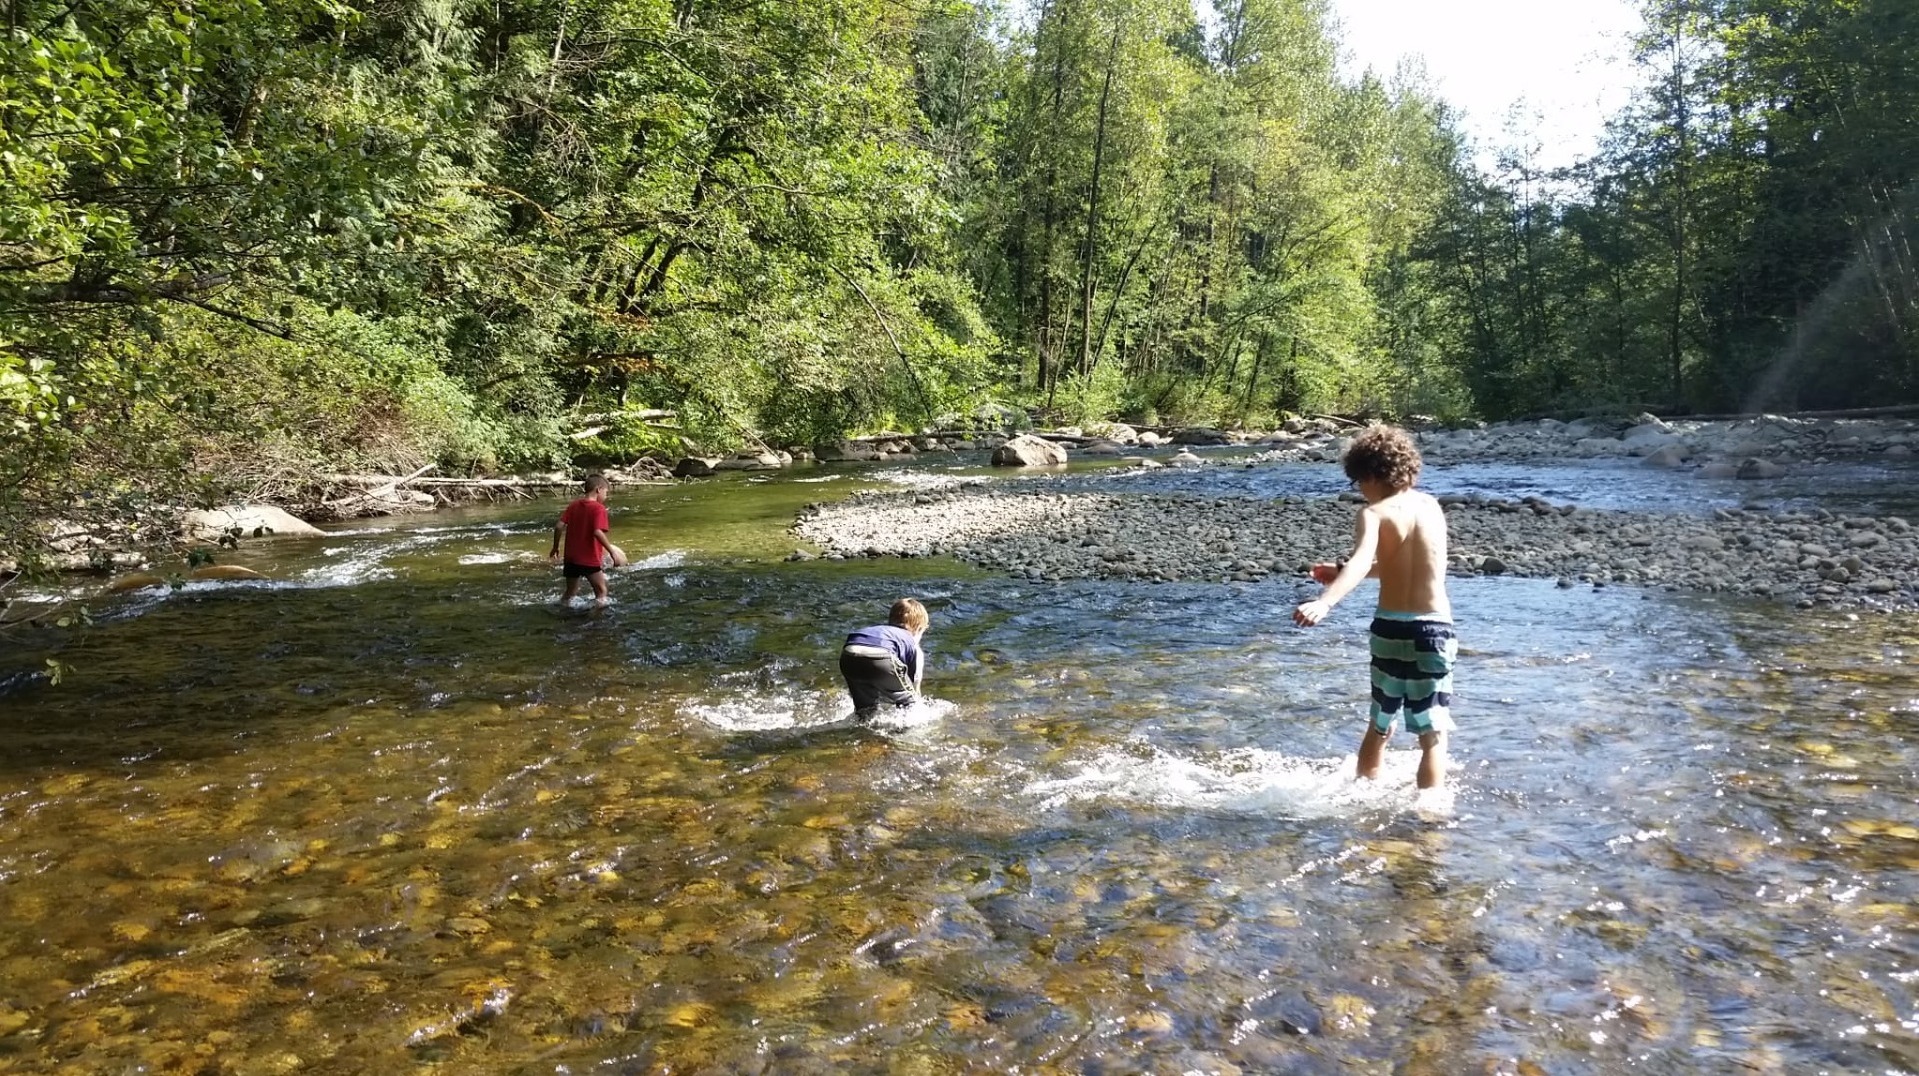 Kids in their swimwear playing in the river